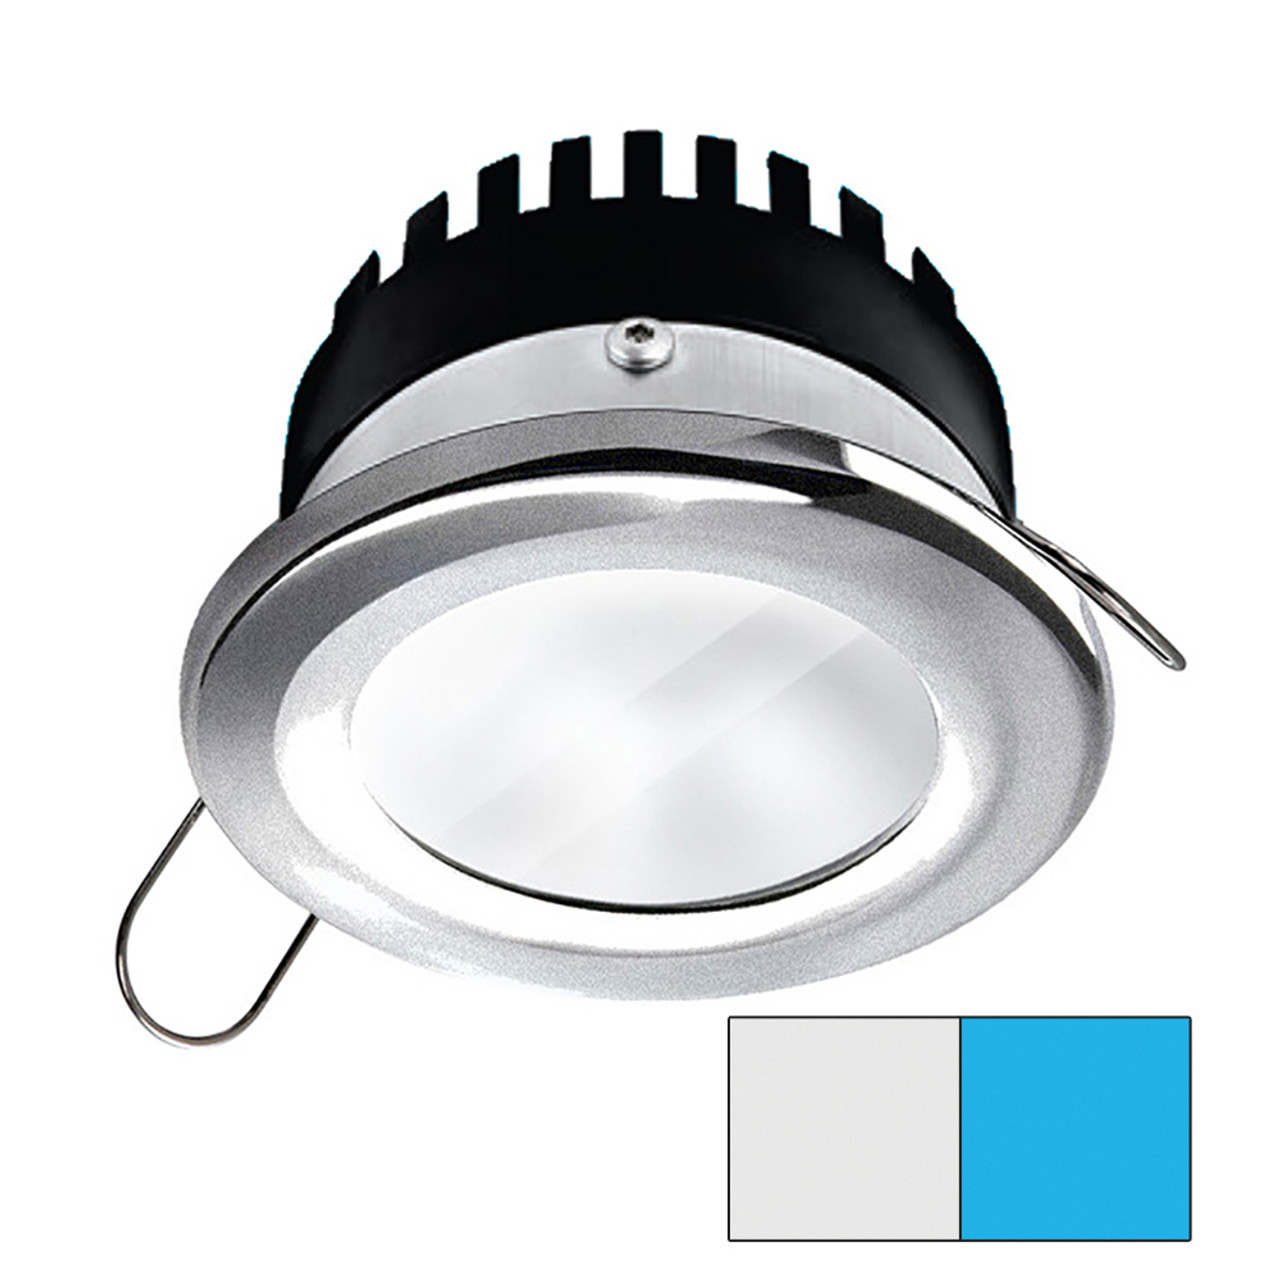 i2Systems - Apeiron PRO A506 - 6W, Spring Mount, Round, Cool White/Blue, Brushed Nickel Finish - Apollo Lighting